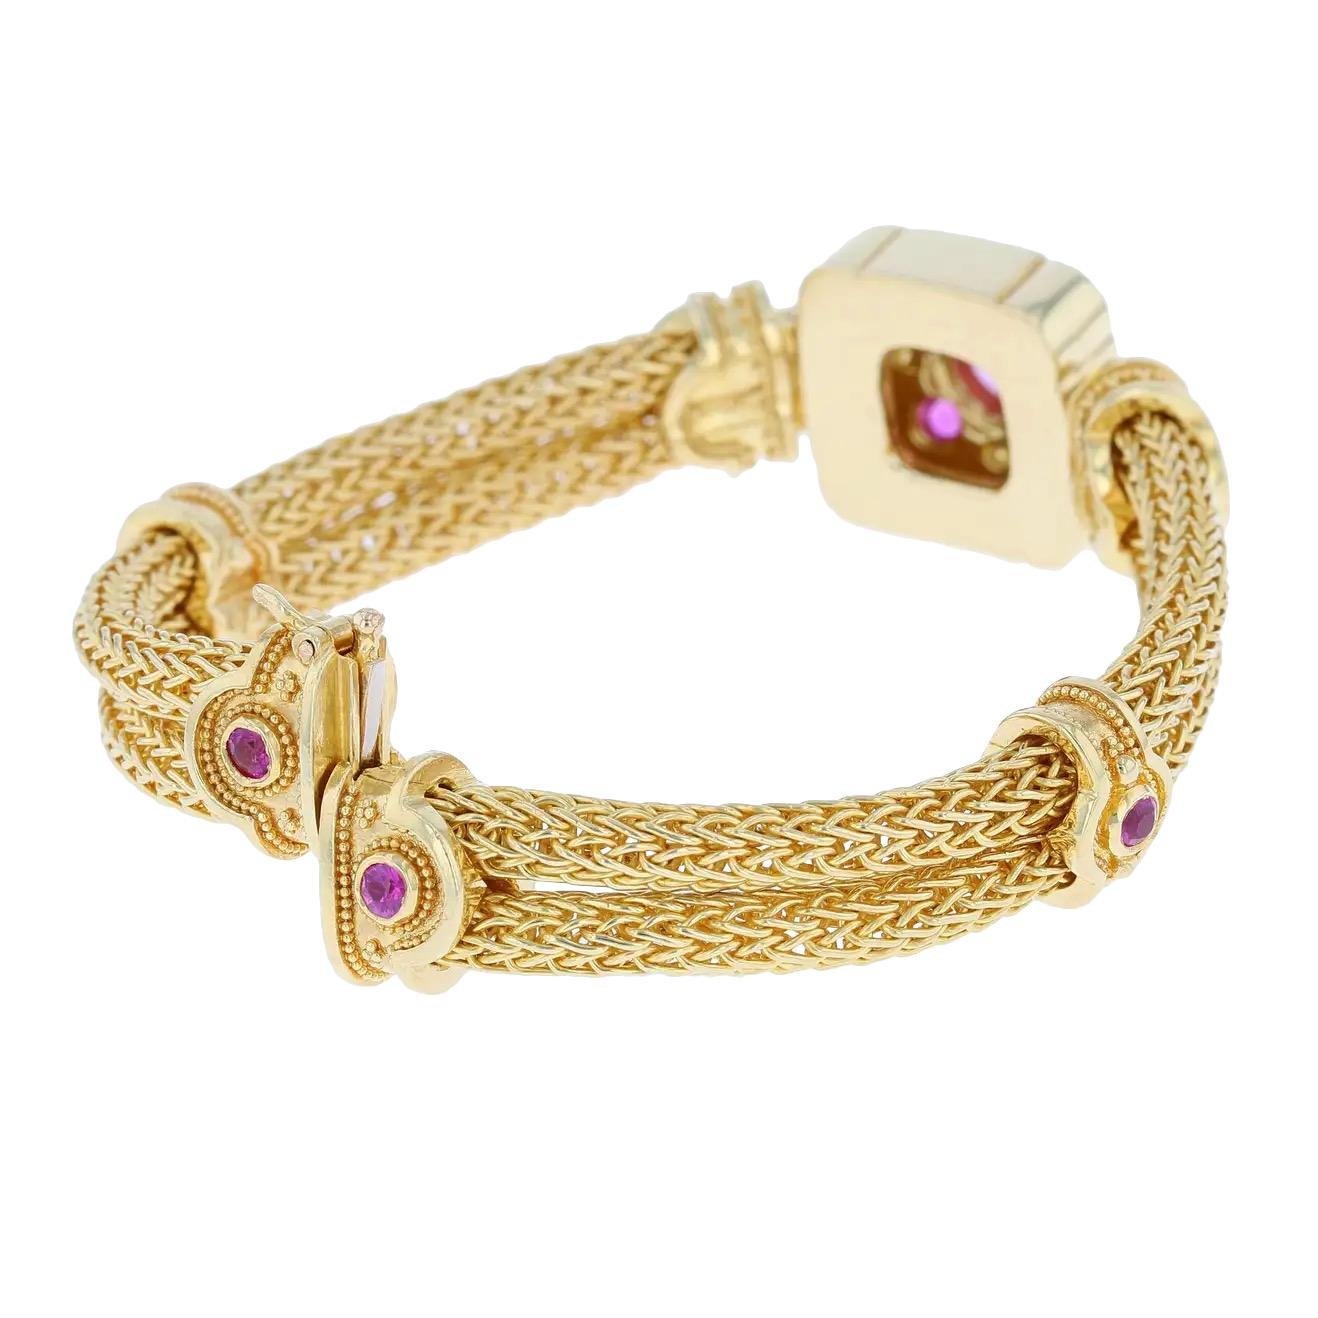 Contemporary Kent Raible Pink Sapphire Woven Chain Bracelet with Fine Granulation For Sale